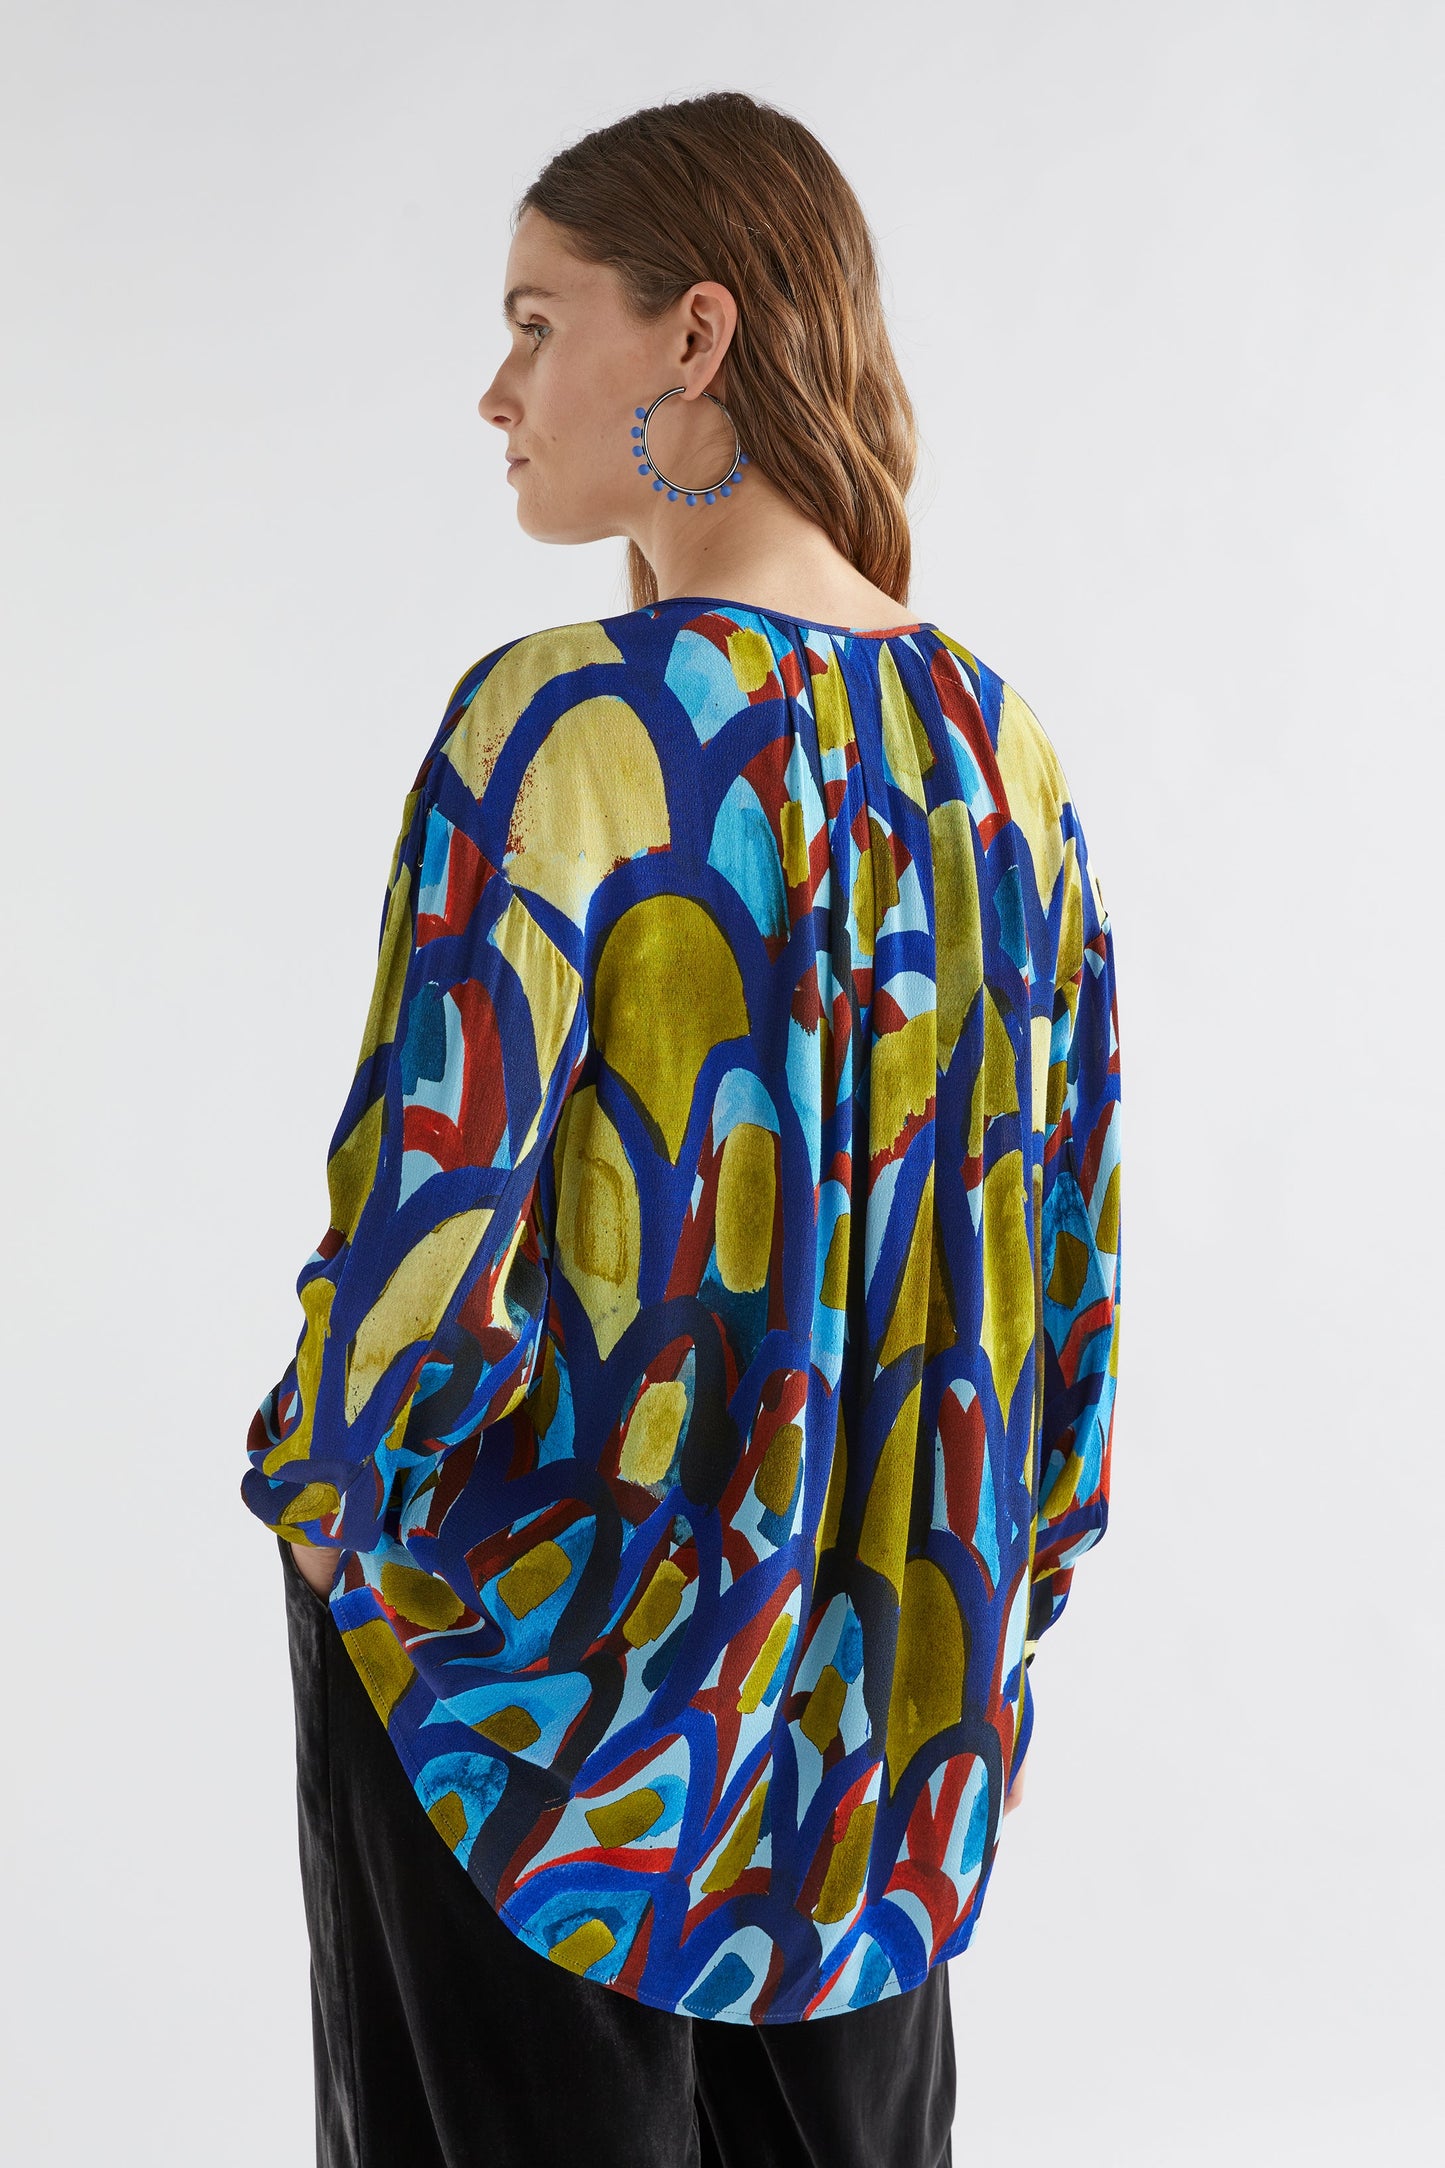 Galerie A-line Collarless Print Shirt with Back Pleat Detail Model Back | BUE PRINT